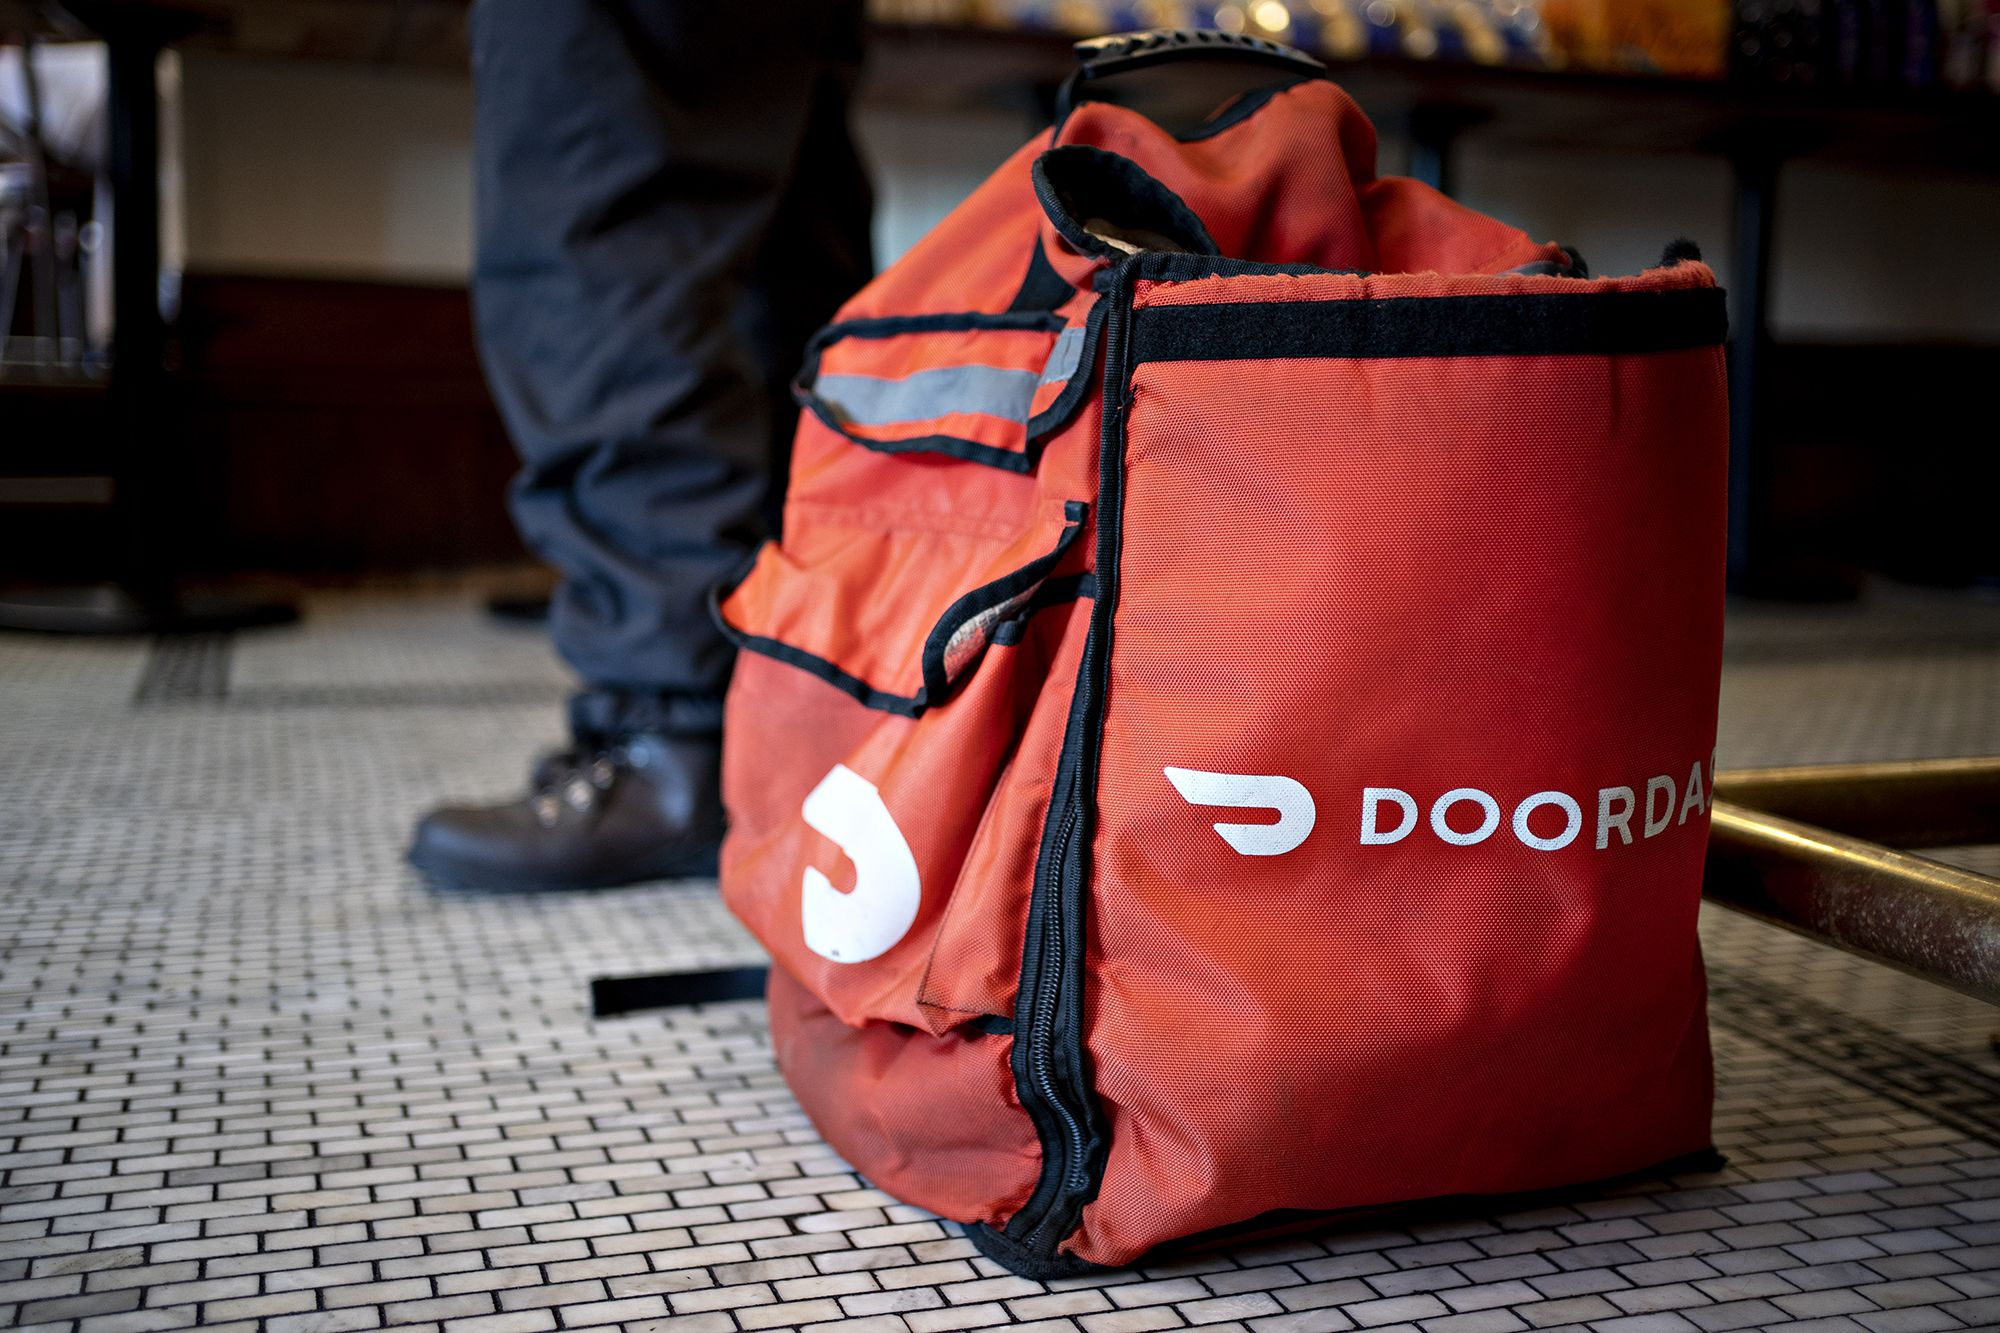 Two Cali grocers partner with DoorDash, adding on-demand delivery